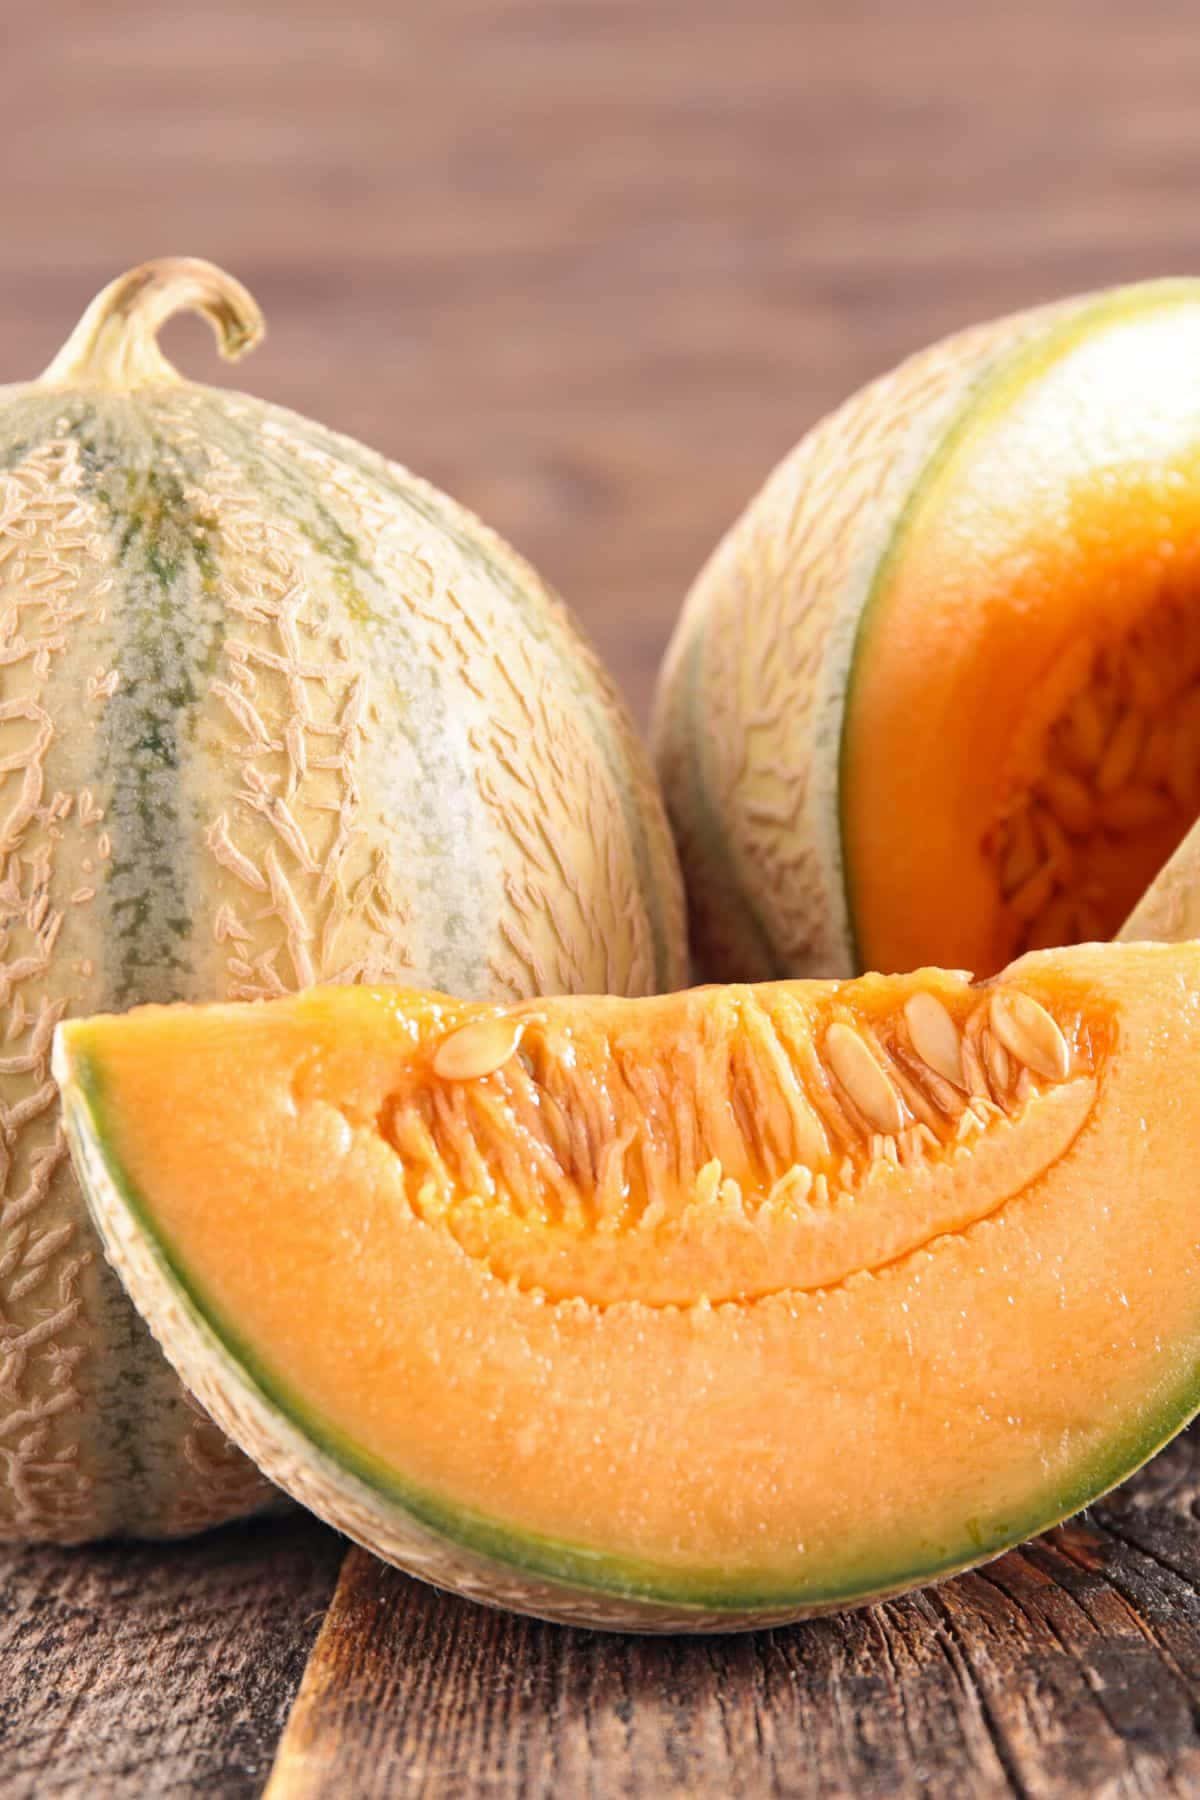 A Melon Is Cut In Half And Sitting On A Wooden Table